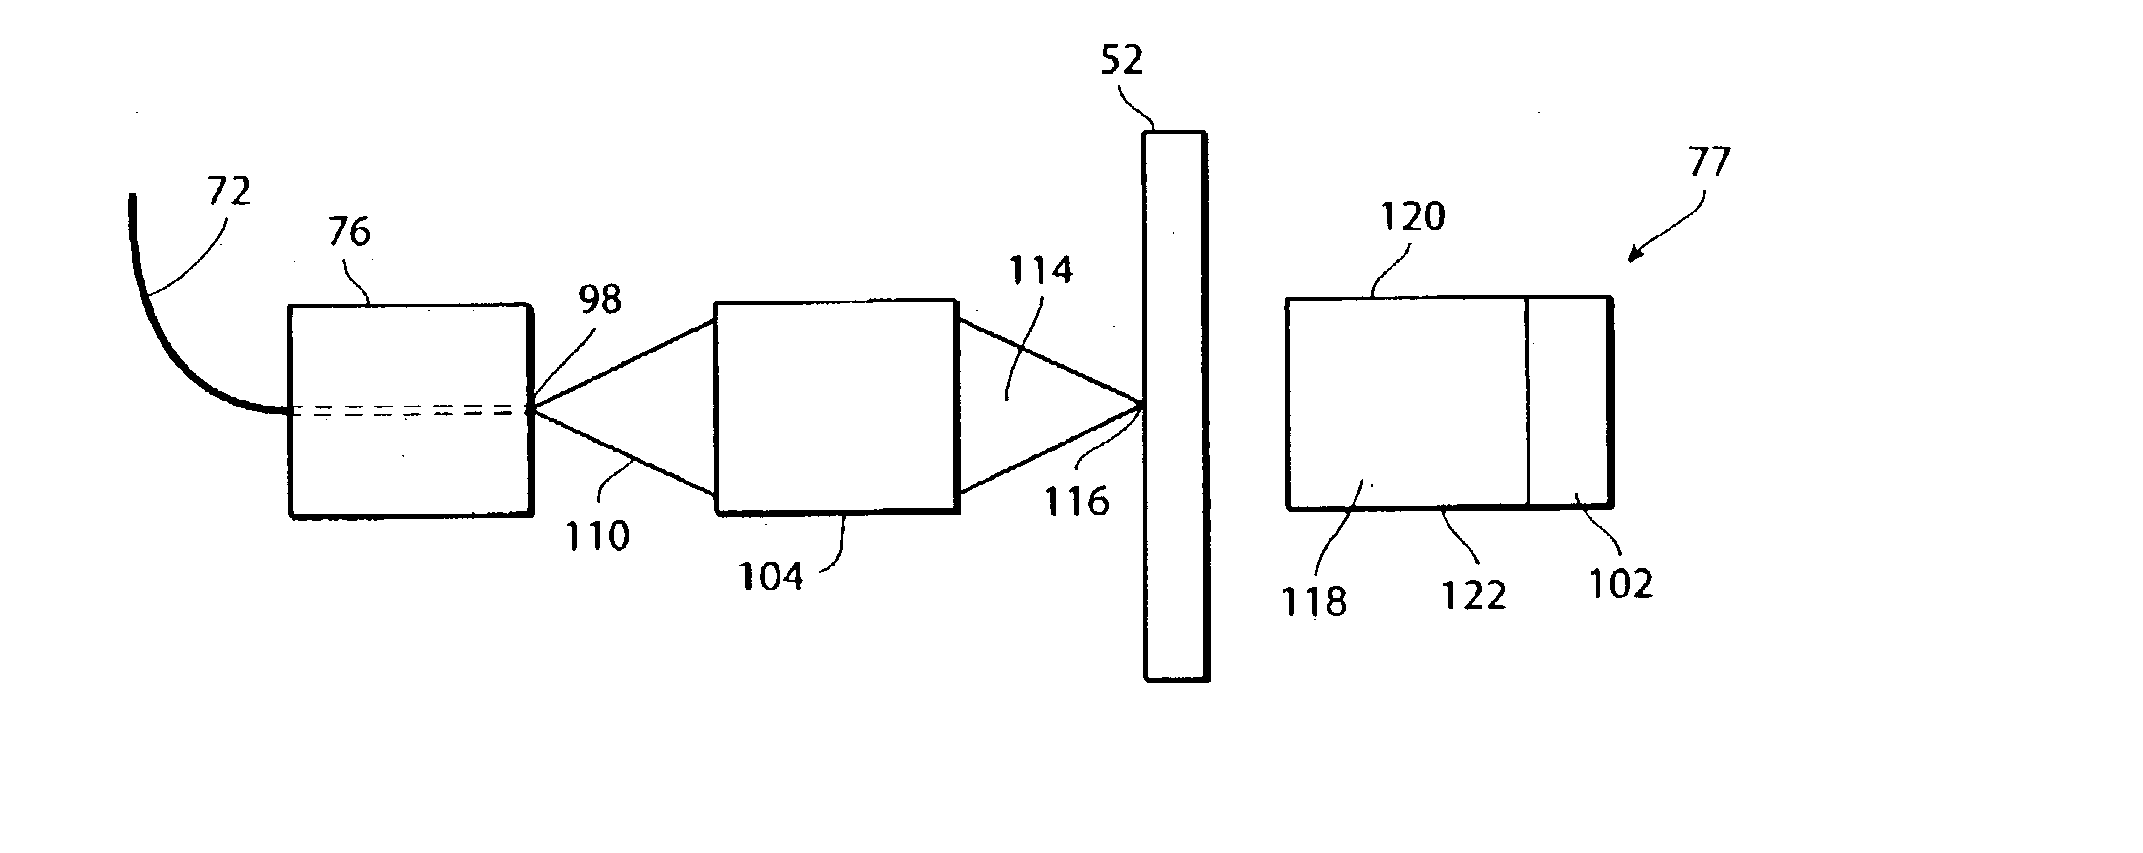 Light receiving and detection system for reading a radiographic image